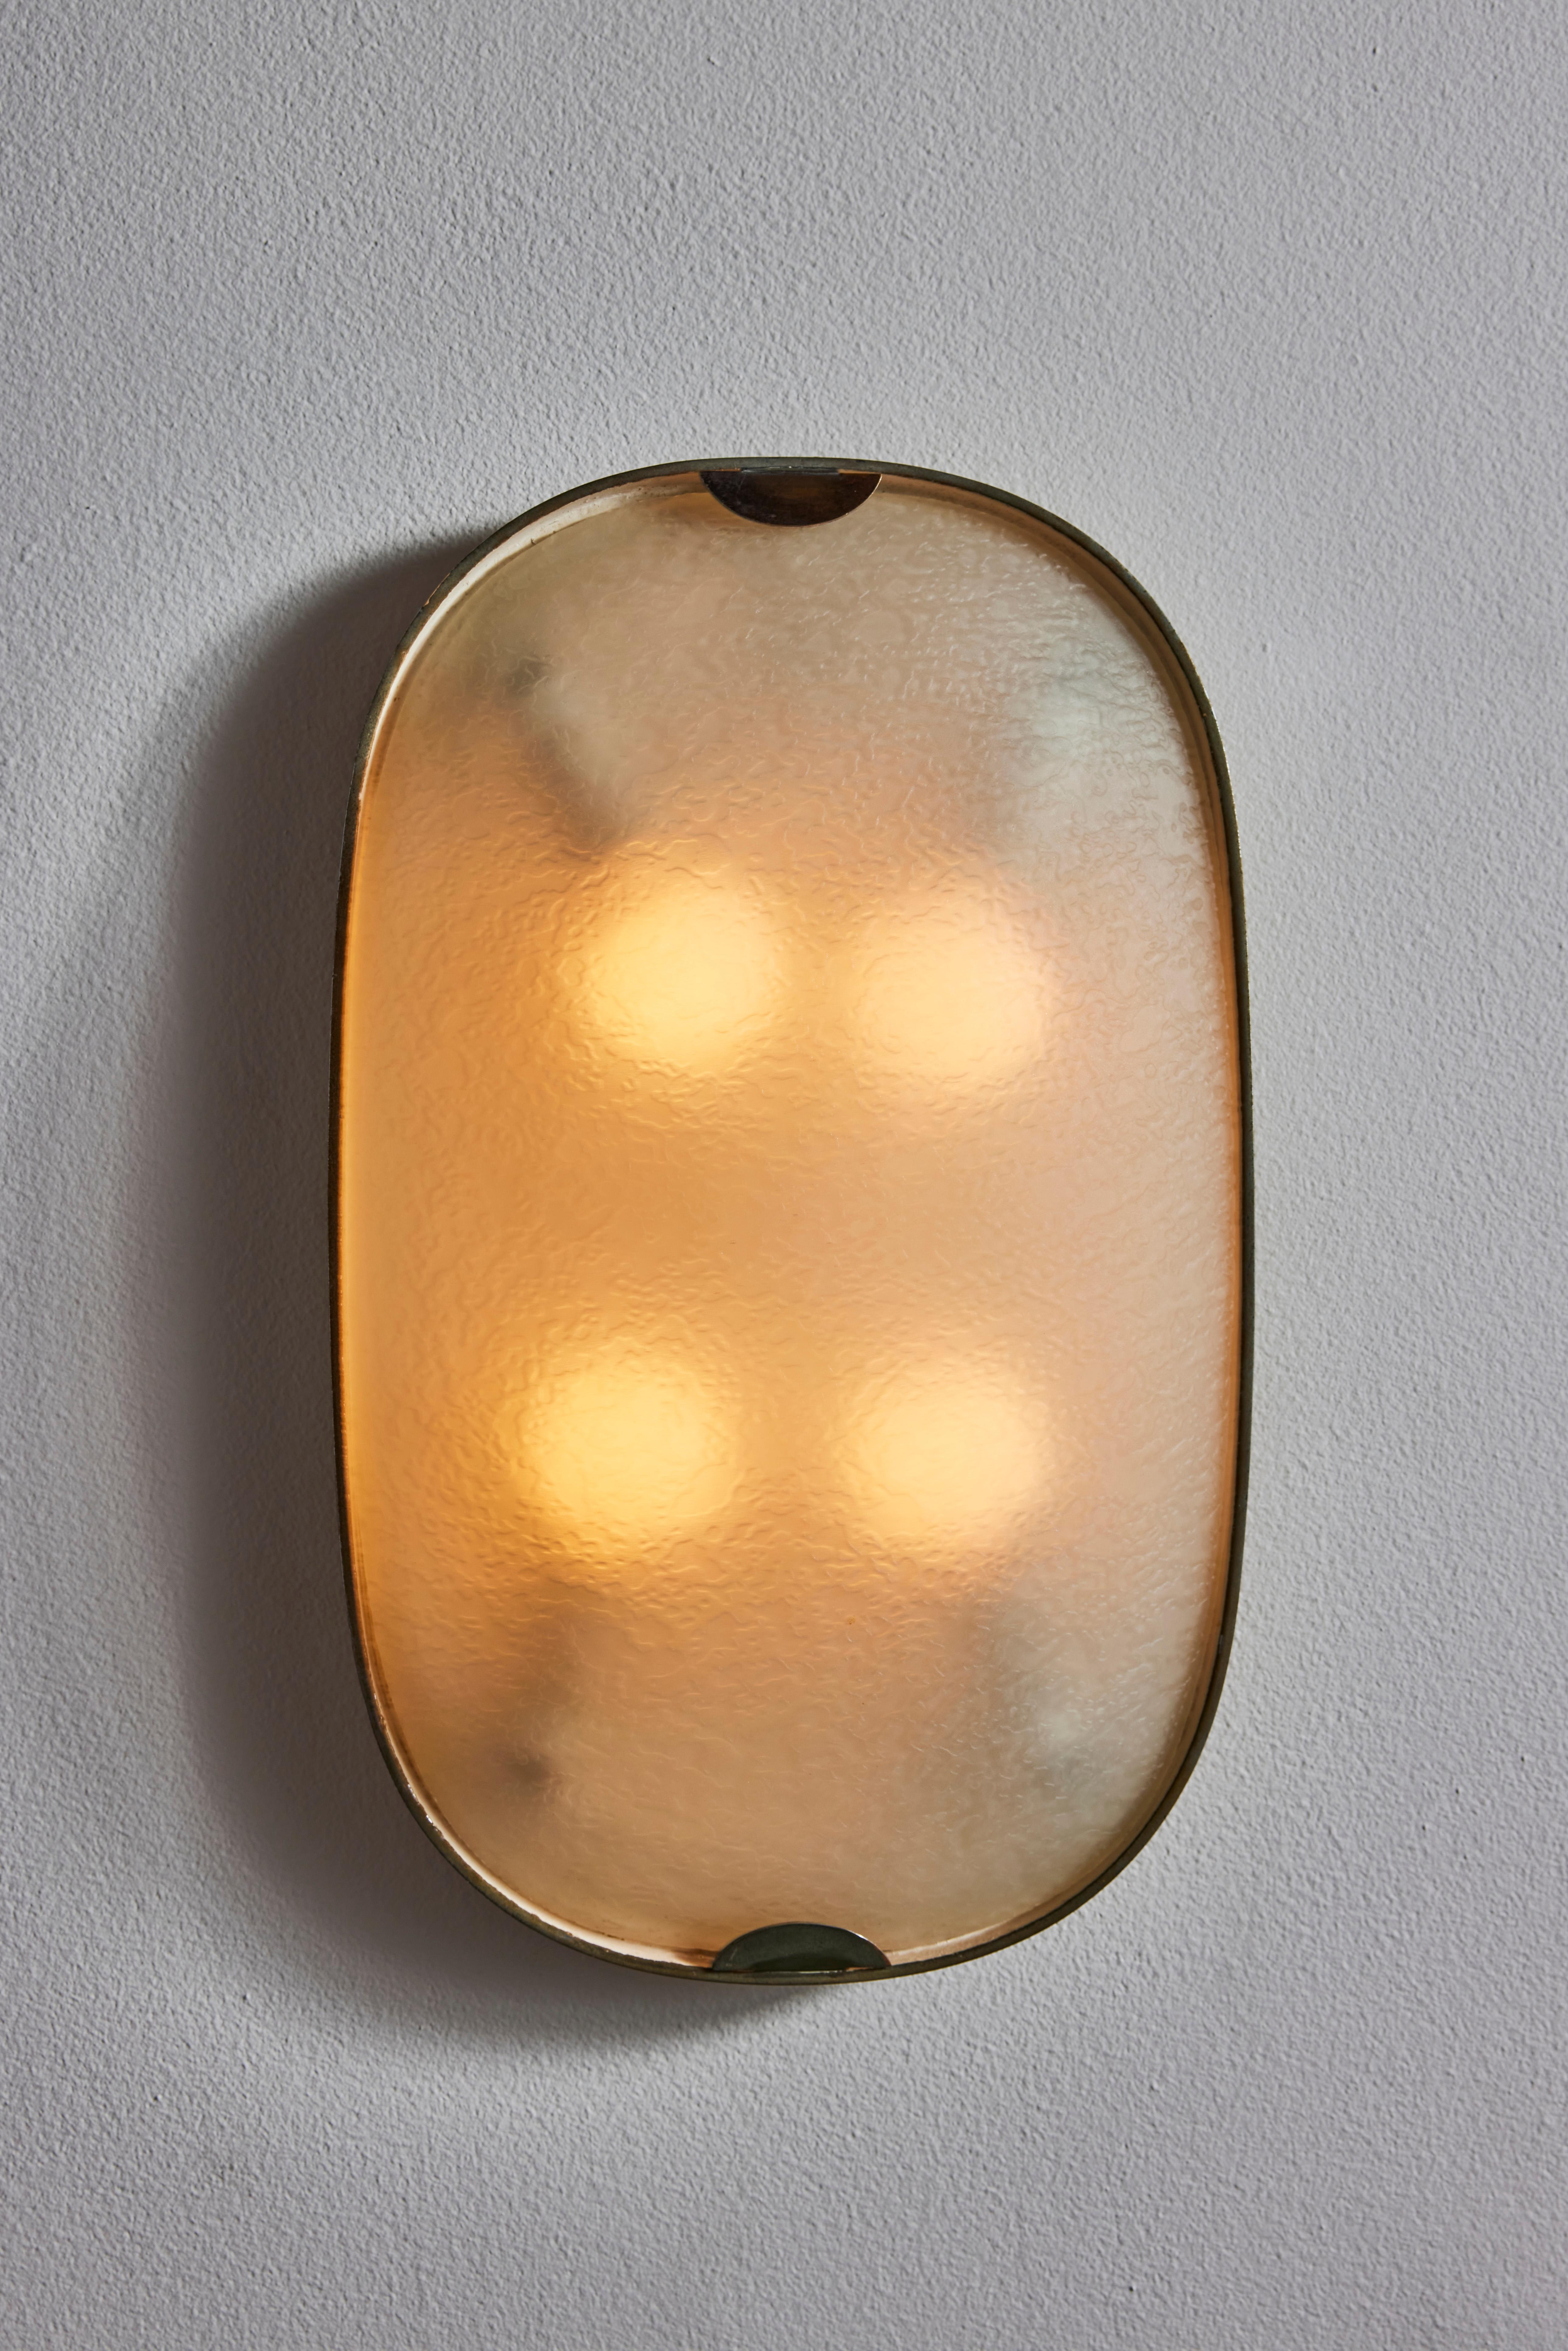 Wall/ Flush mount ceiling lights by Fontana Arte. Designed and manufactured in Italy, circa 1950s. Textured glass, brass. Rewired for U.S. standards. We recommend four E26 25w maximum bulbs. Bulbs provided as a one time courtesy.